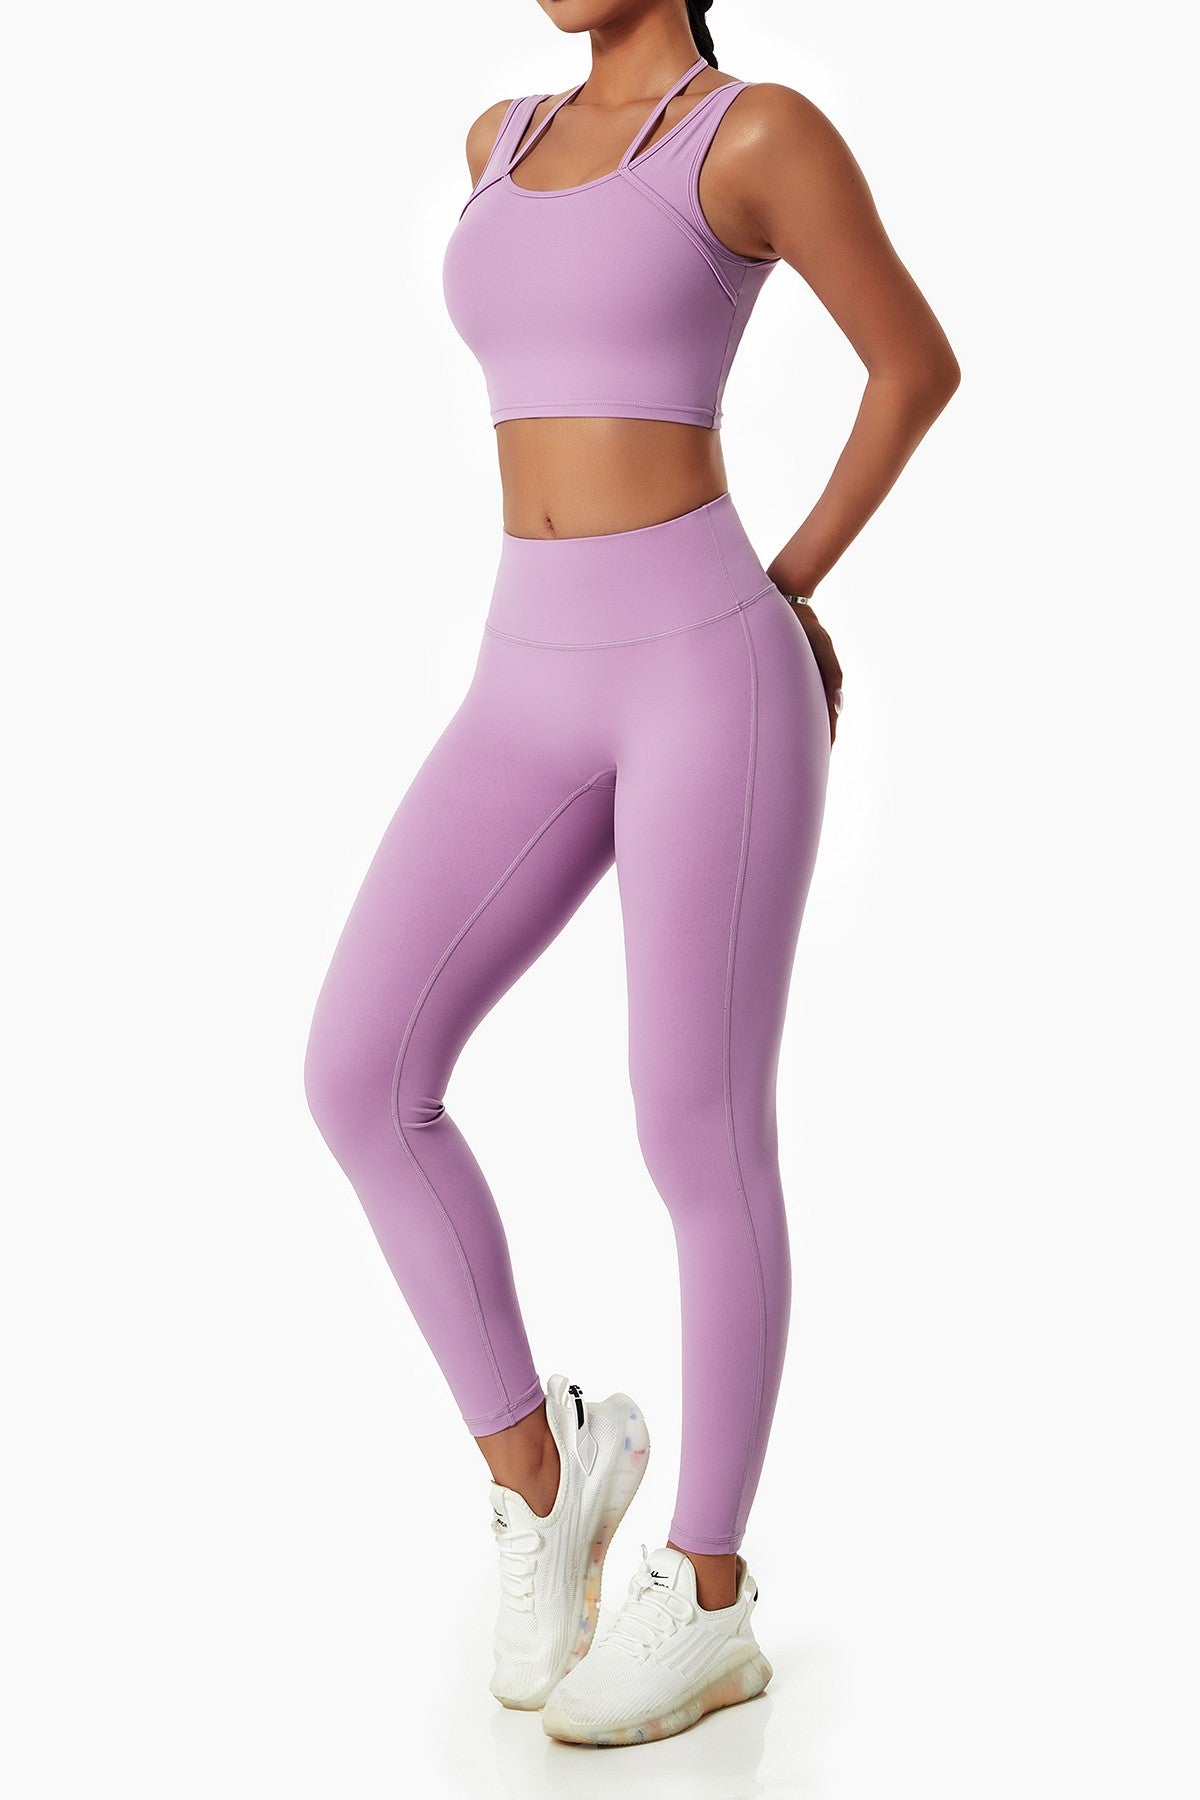 High Waisted Leggings for Women Snowflake Print Butt Lift Athletic Pants  Ultra Soft No See-Through Pants for Running Cycling